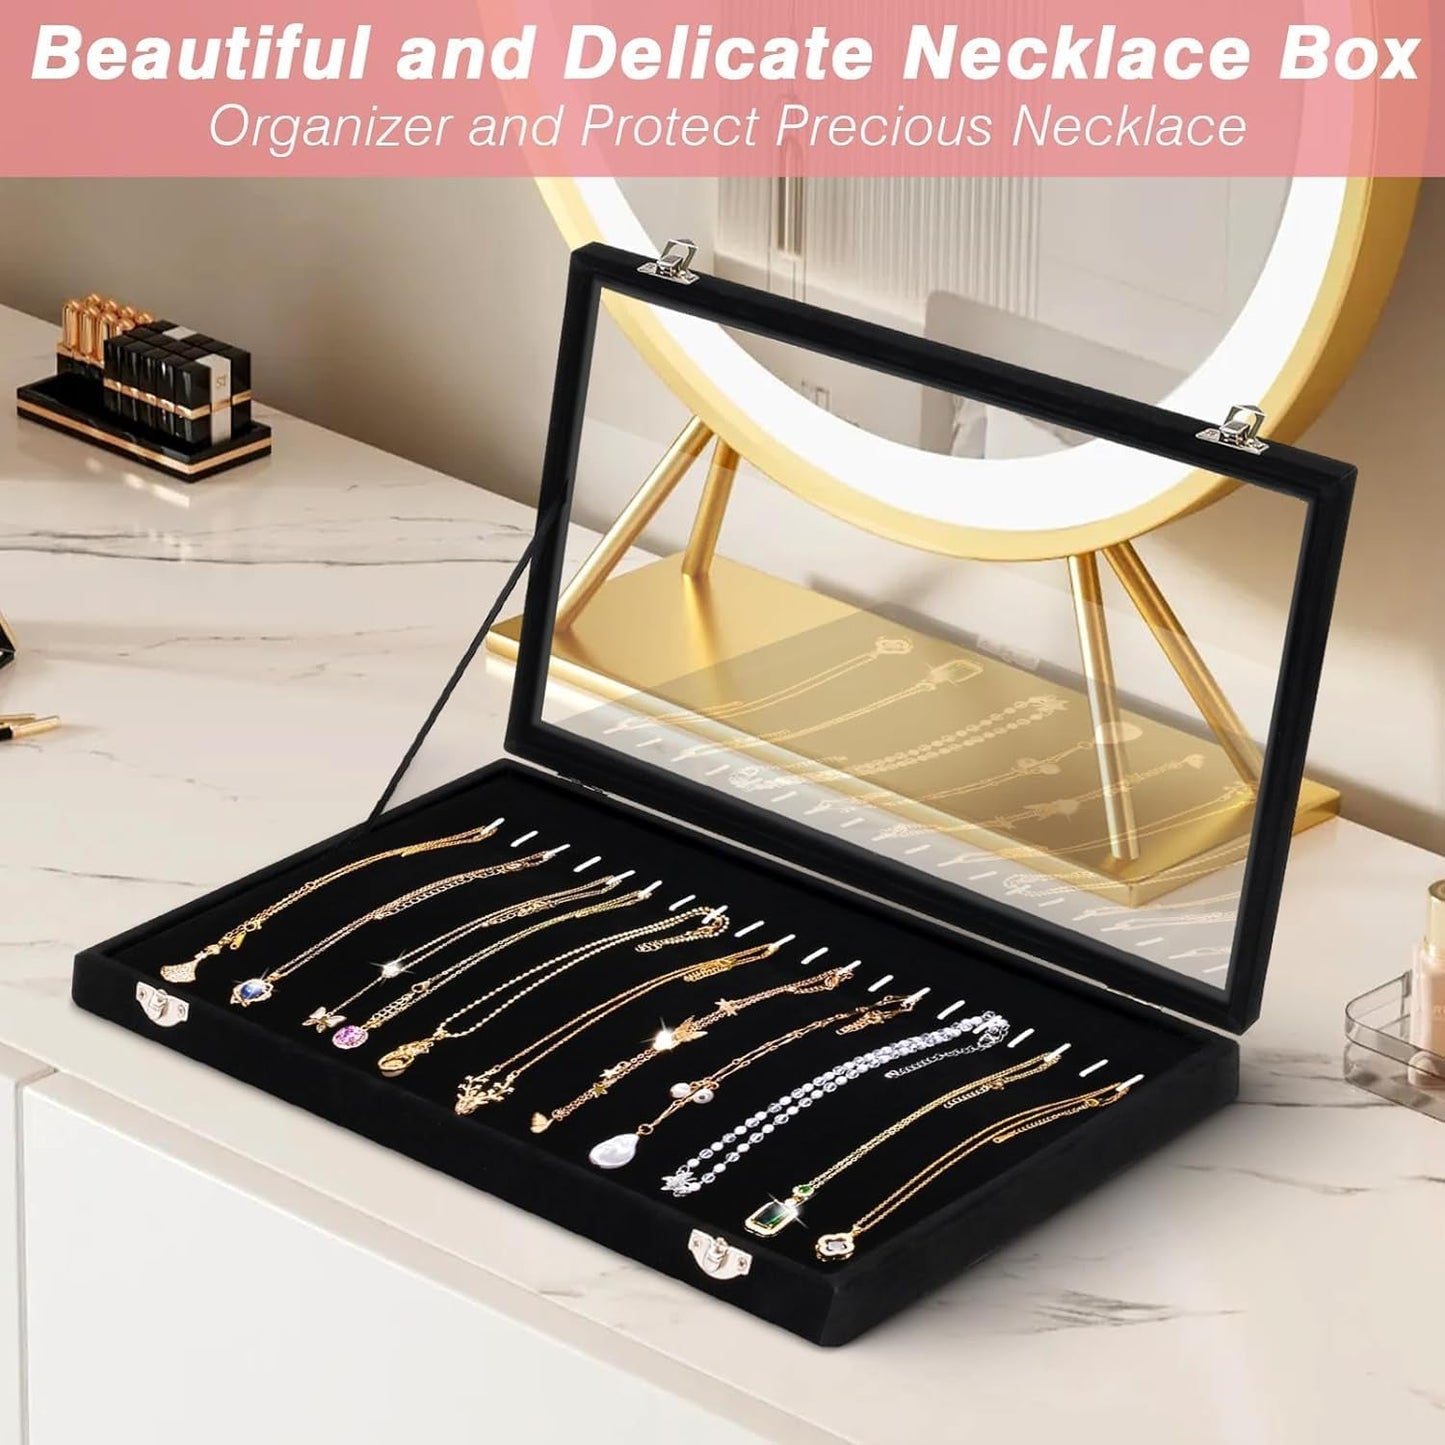 Necklace Holder Organizer, Necklace Organizer Box with Clear Lid, anti Tarnish Jewelry Hanger Storage Case, 20 Hooks Velvet Jewelry Tray for Drawer Display Bracelet Gifts Girls Women